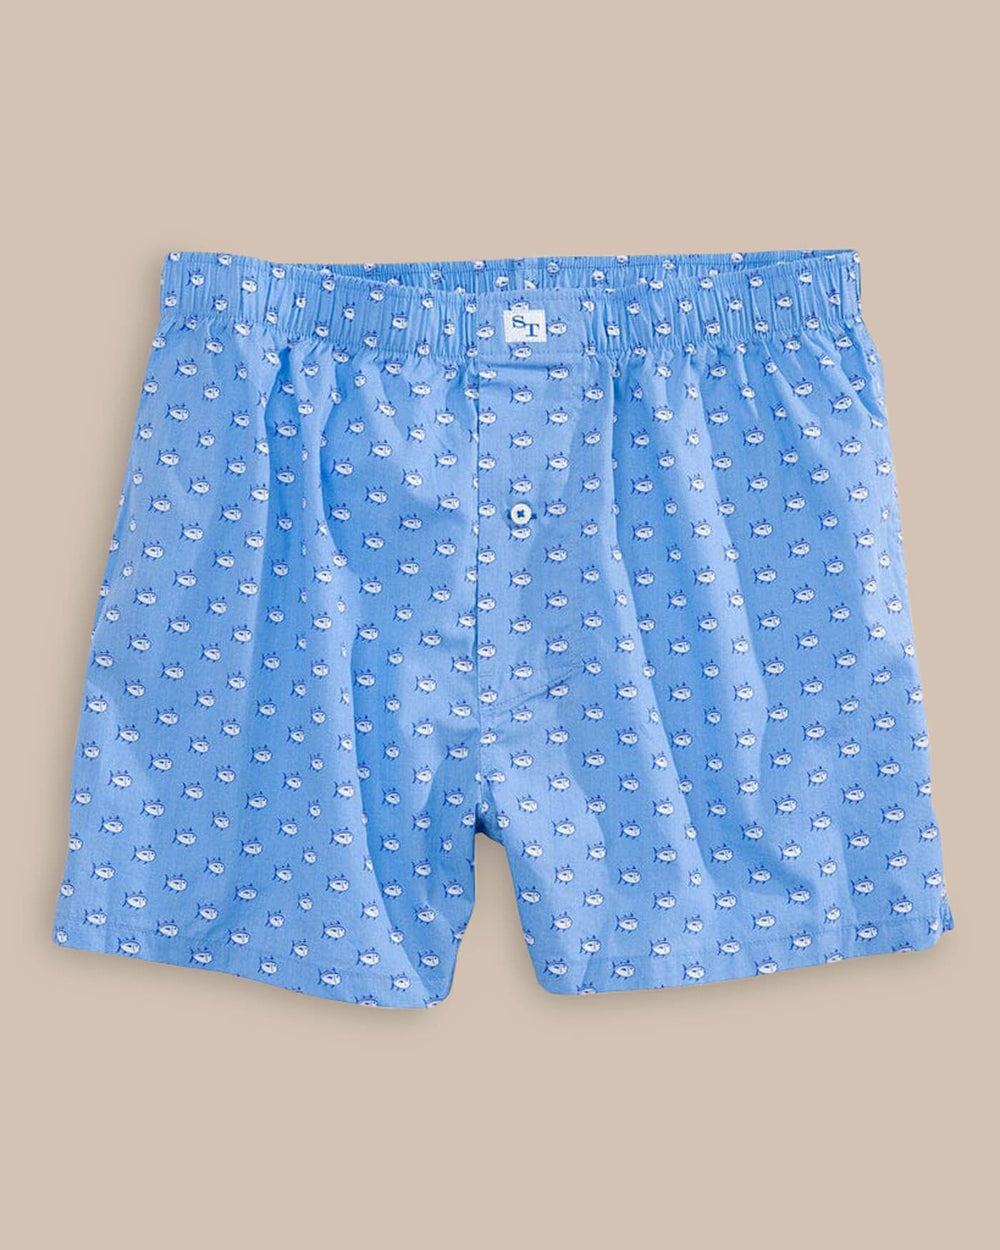 The front view of the Men's Blue Skipjack Boxer Shorts by Southern Tide - Ocean Channel